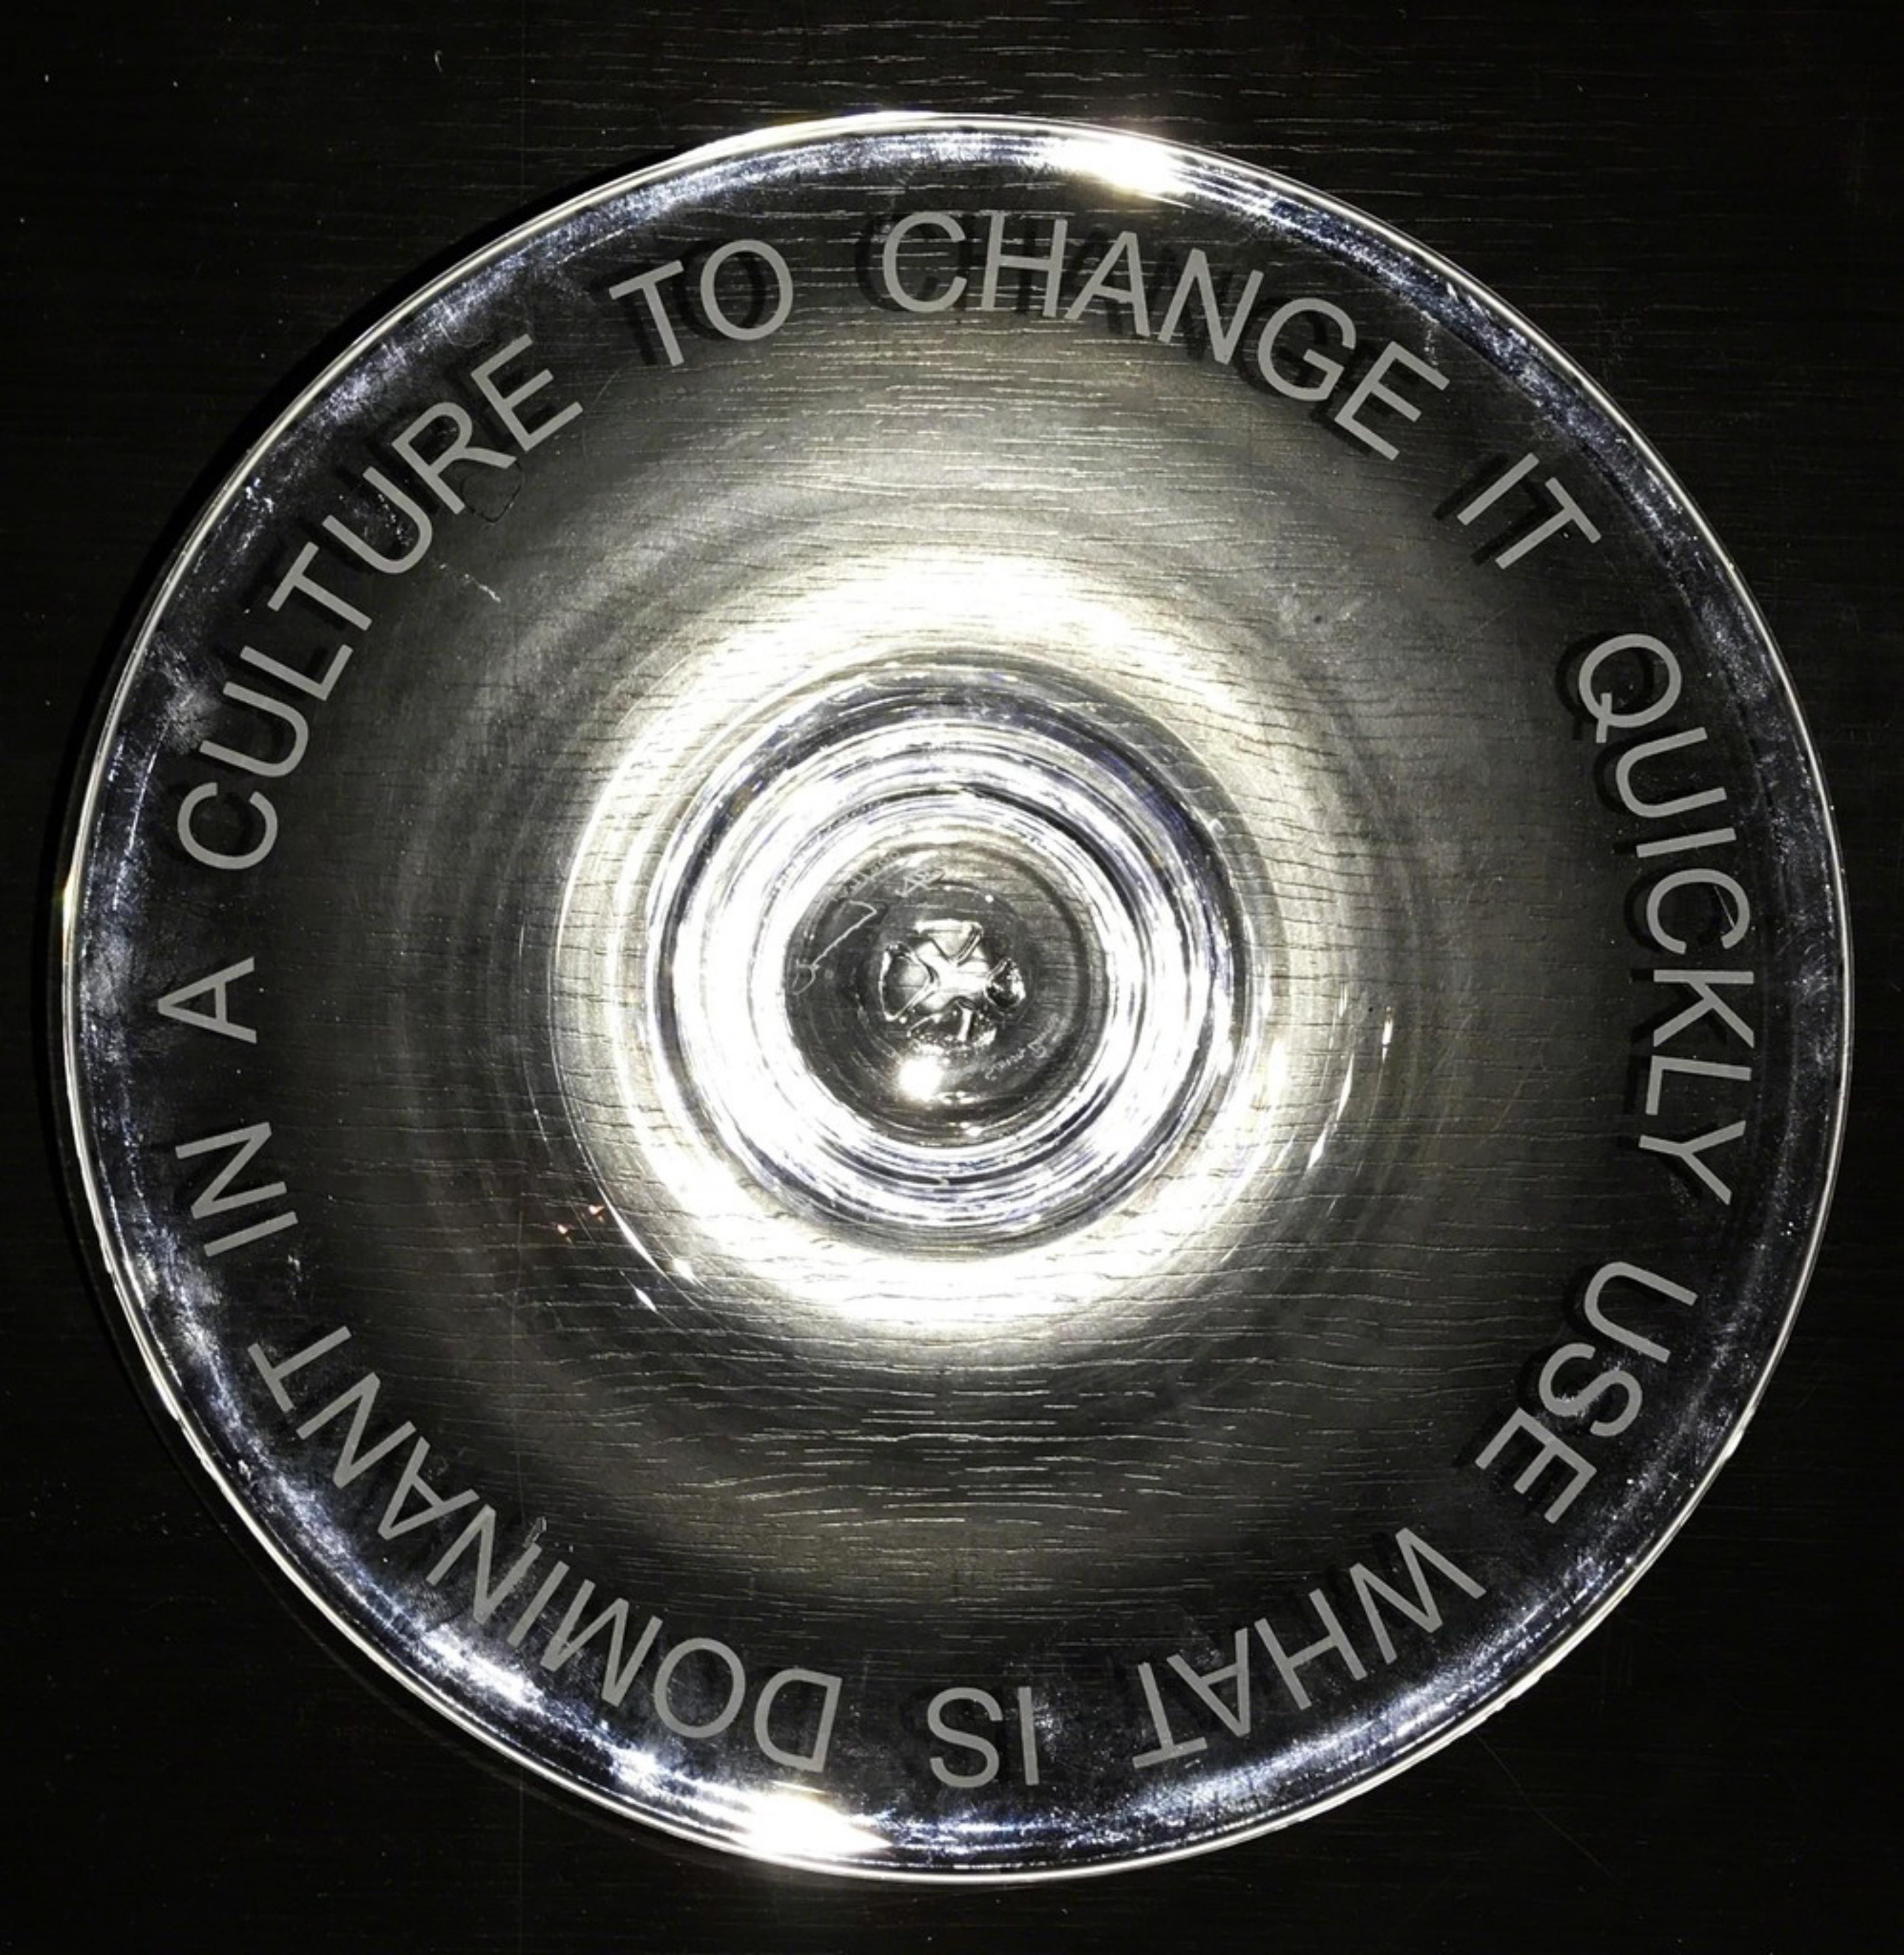 USE WHAT IS DOMINANT IN A CULTURE TO CHANGE IT: Signierte Glasschale, Whitney Museum – Sculpture von Jenny Holzer